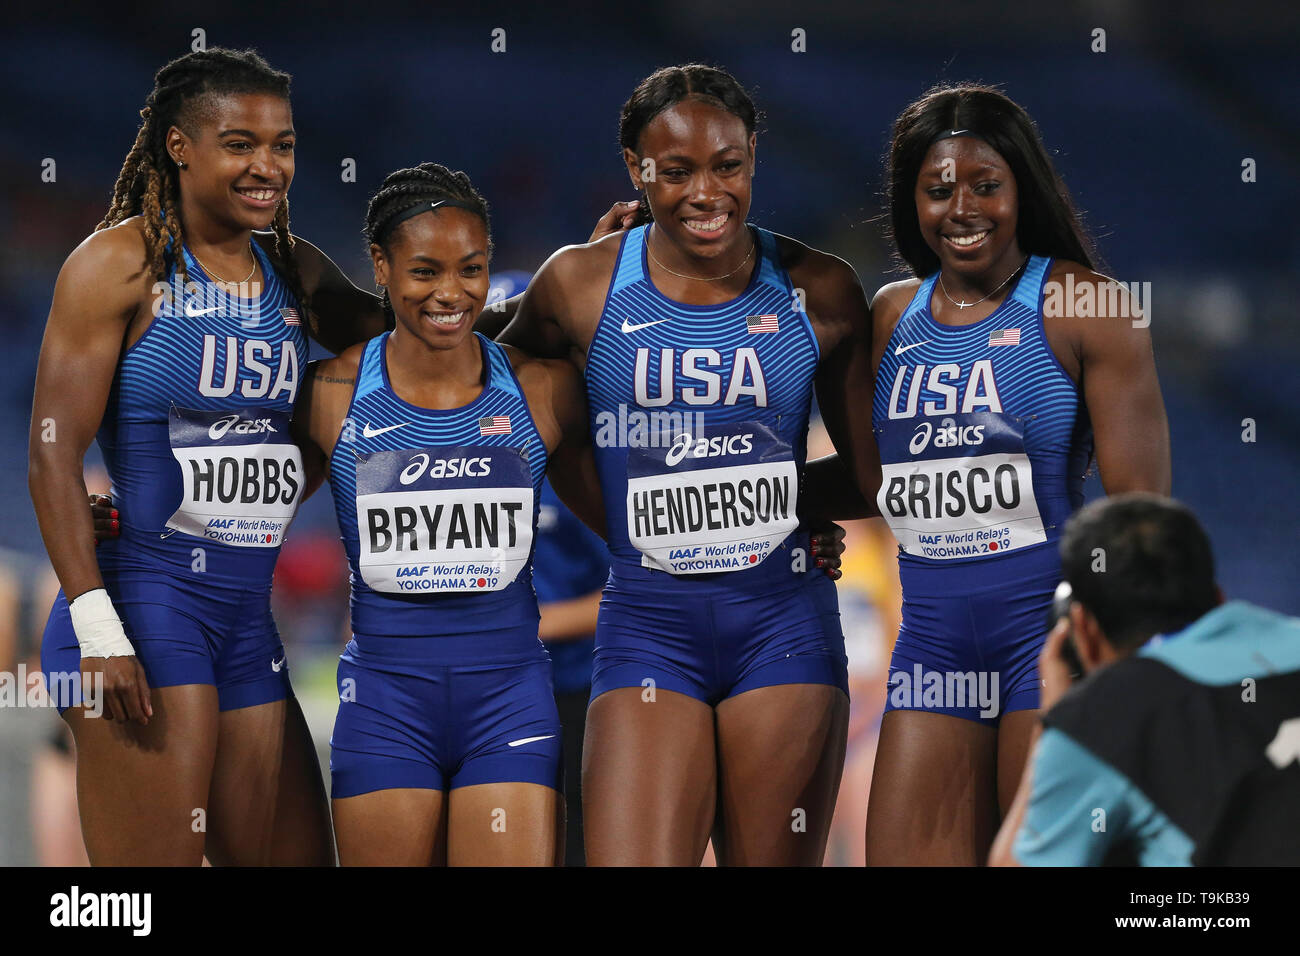 YOKOHAMA, JAPAN - MAY 10: Aleia Hobbs, Dezerea Bryant, Ashley Henderson and Mikiah Brisco of the USA 4x100m relay team during Day 1 of the 2019 IAAF World Relay Championships at the Nissan Stadium on Saturday May 11, 2019 in Yokohama, Japan. (Photo by Roger Sedres for the IAAF) Stock Photo